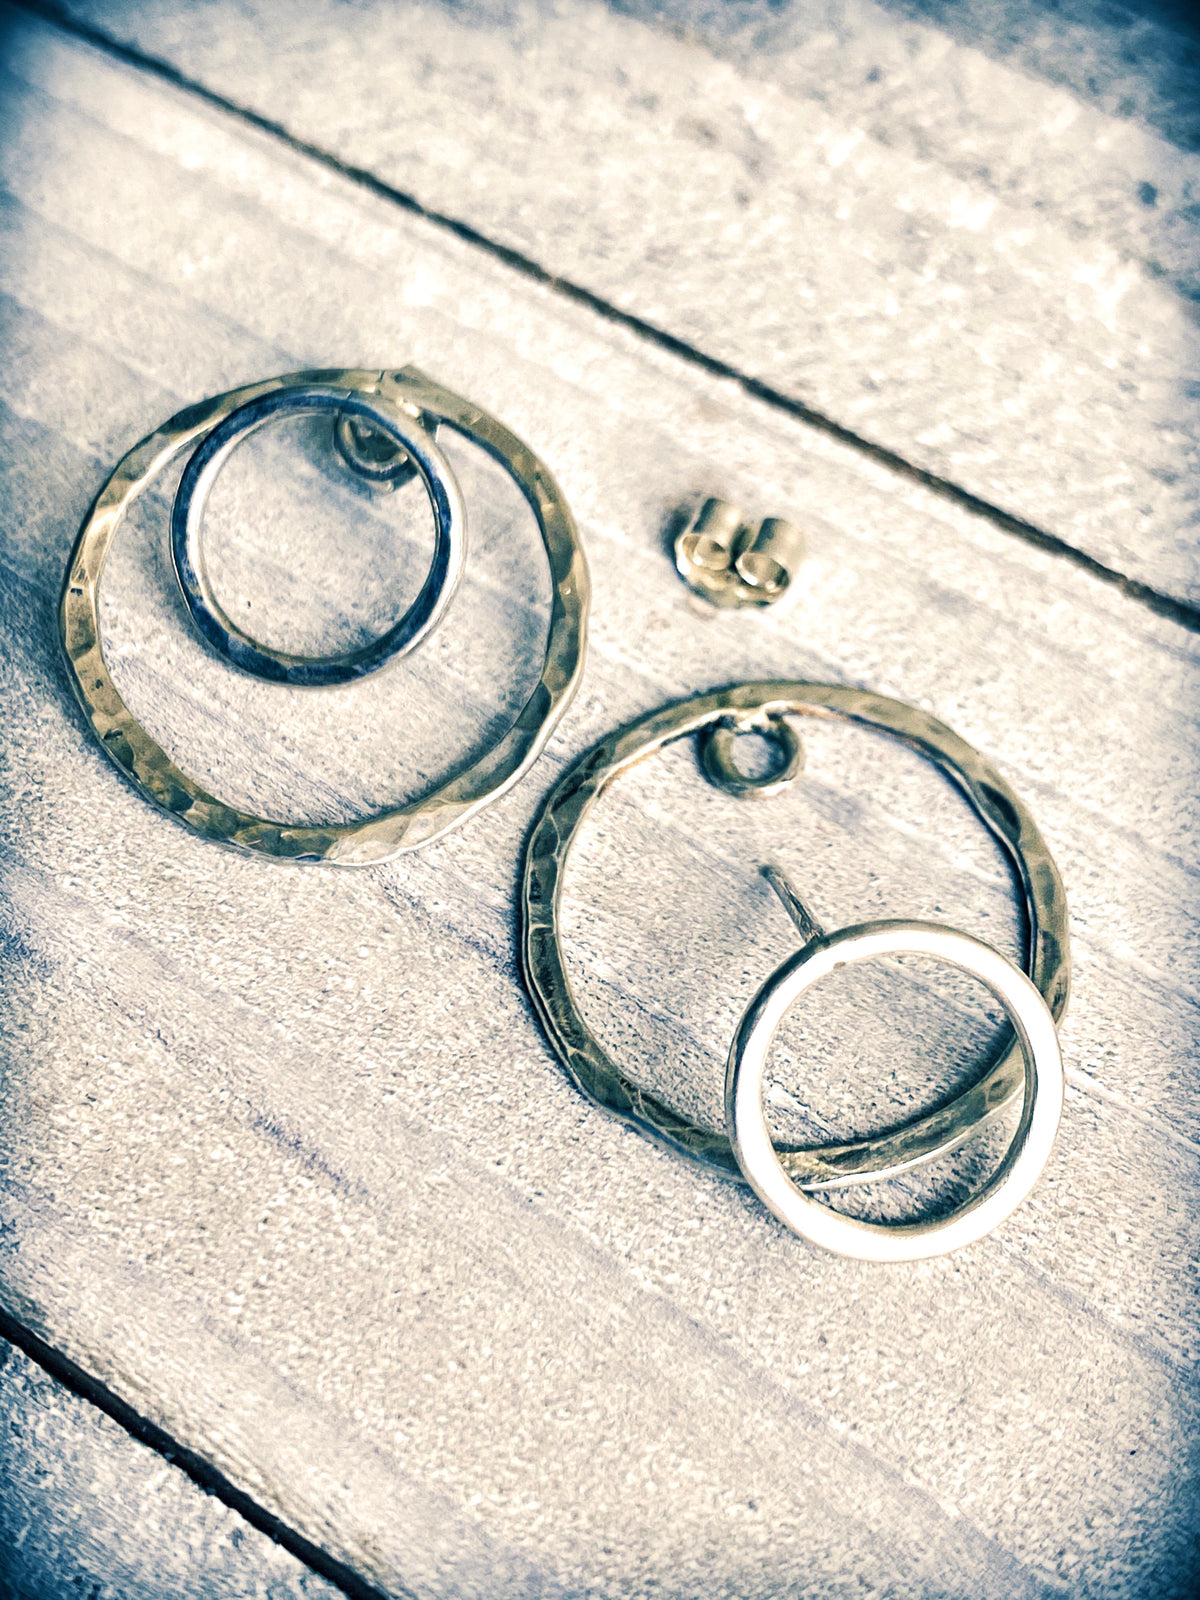 Double-Sided Circular Post Earrings | Solid Sterling Silver